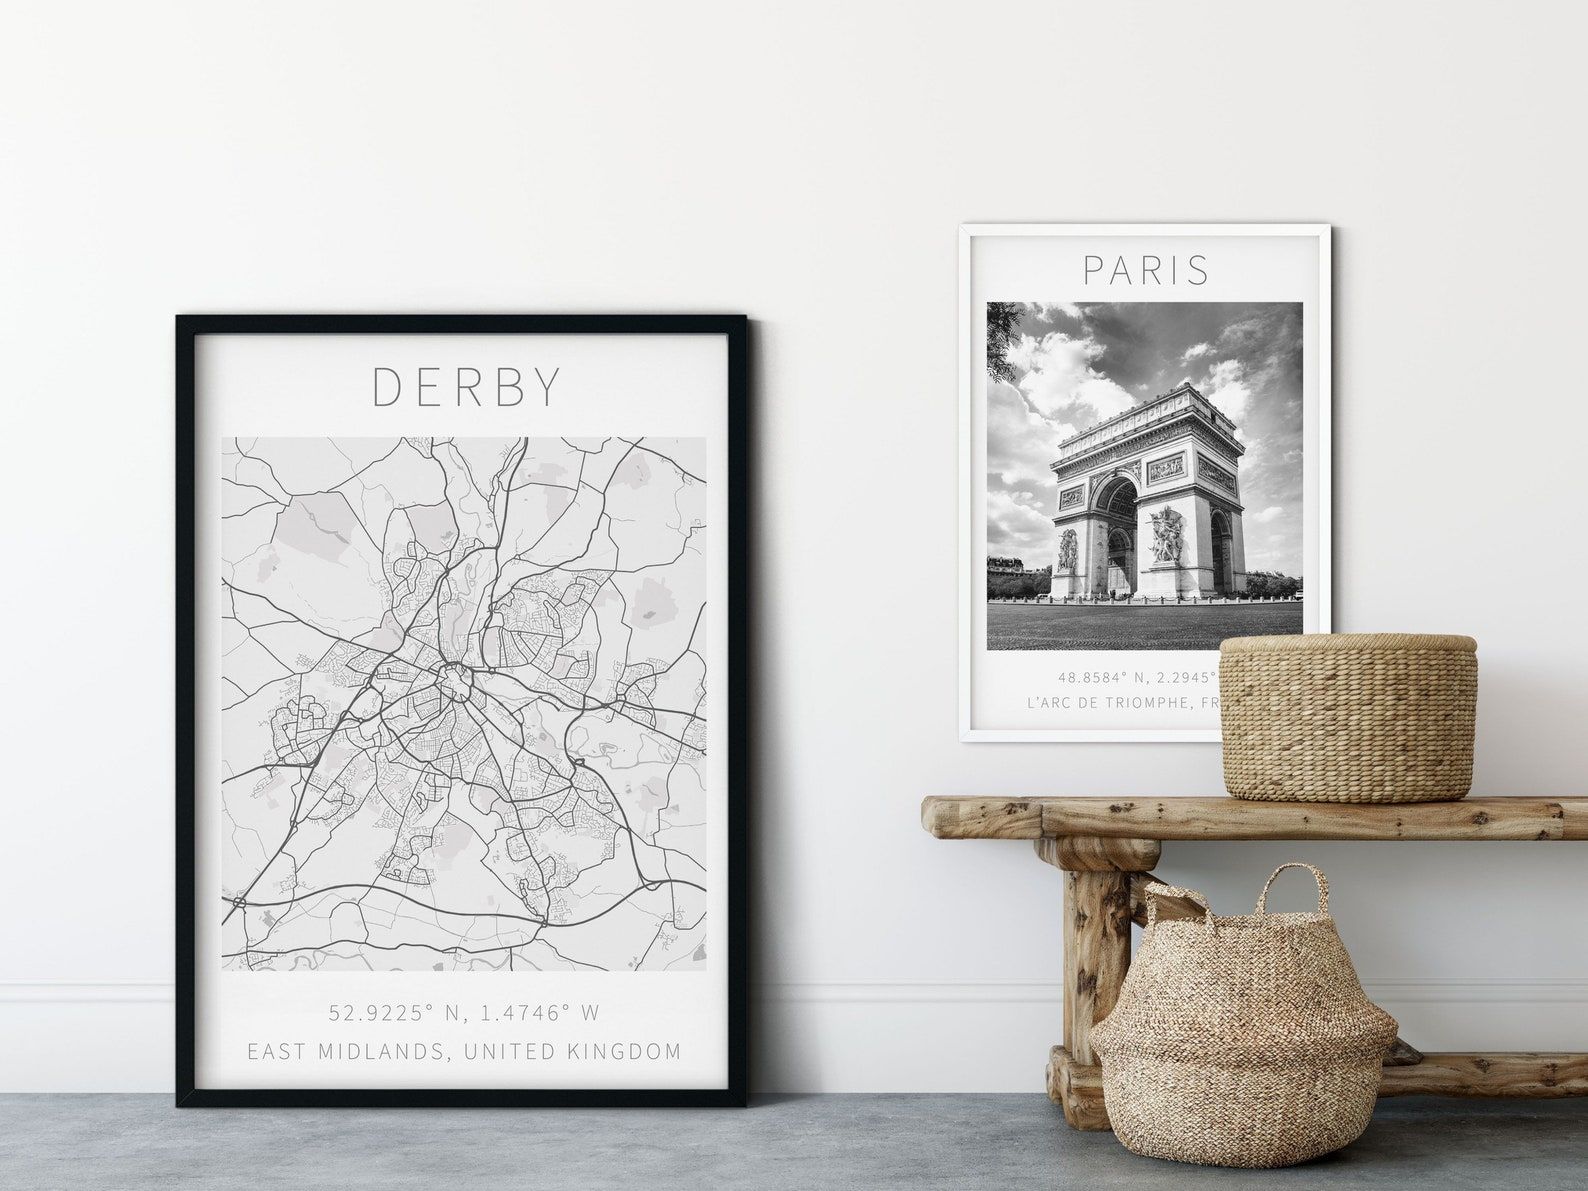 Derby Framed Map Art Wall Print East Midlands Art Derby | Etsy For Current Derby Wall Art (View 17 of 20)